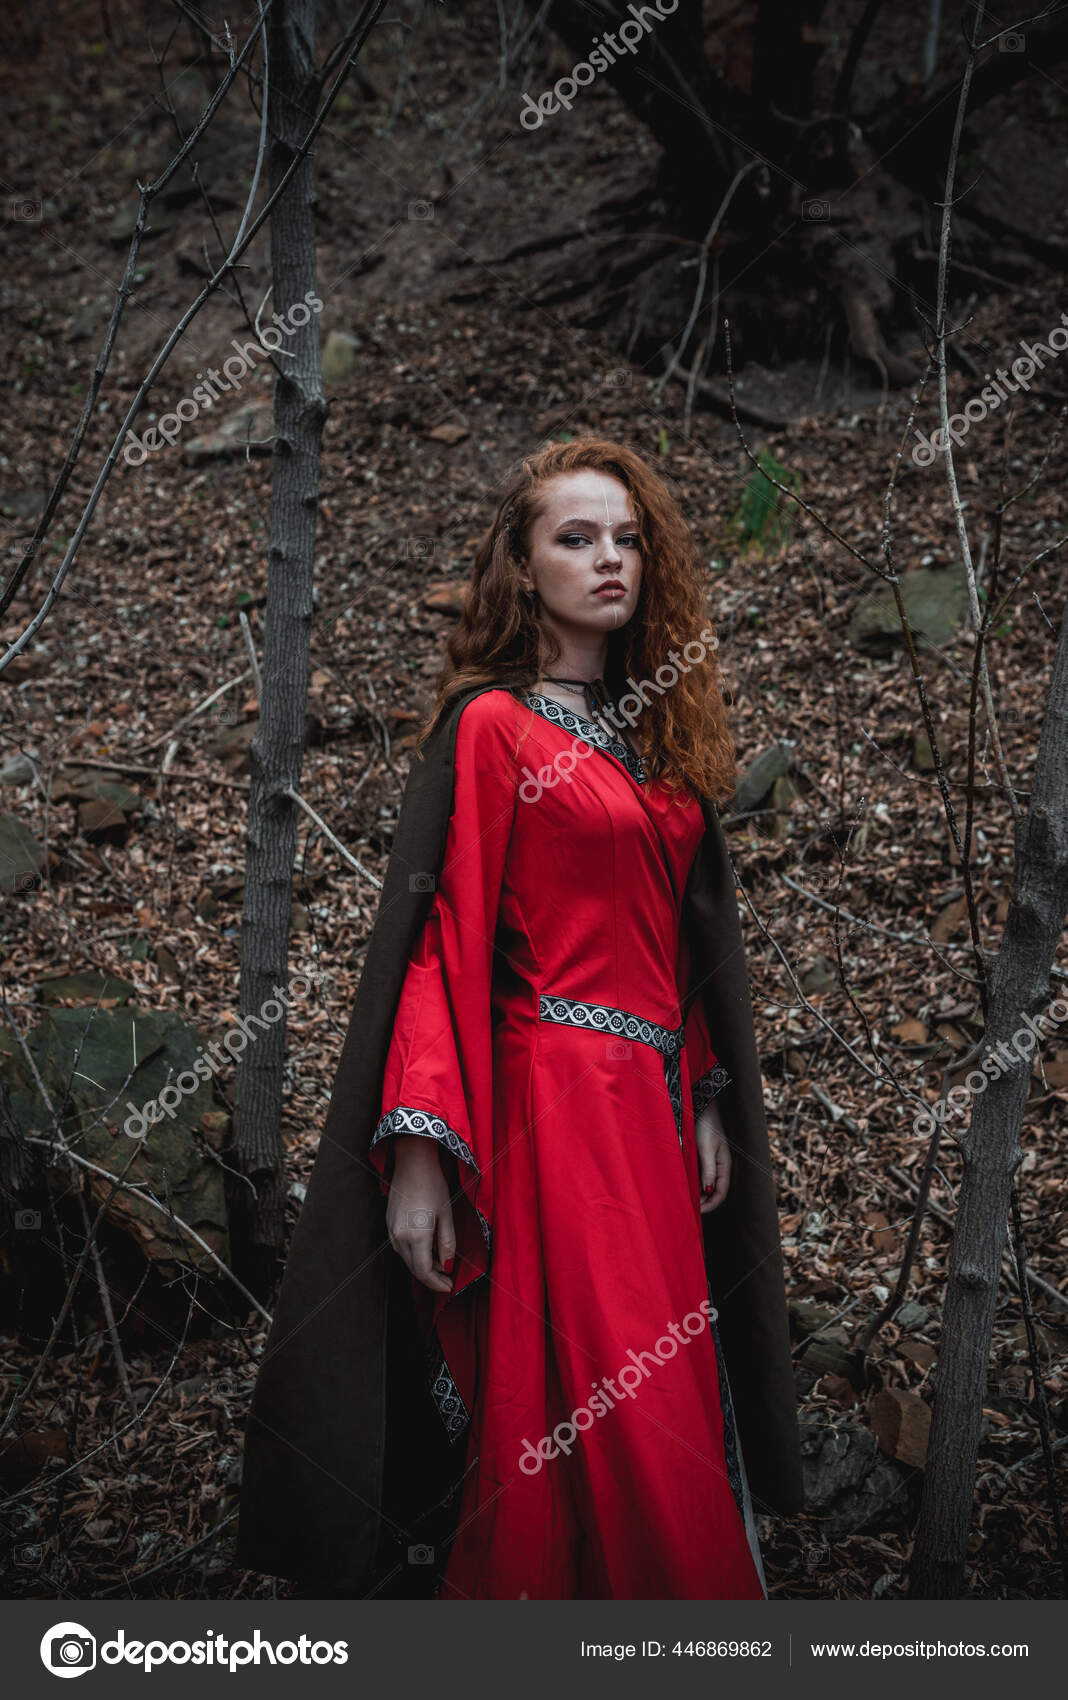 Red Haired Woman Red Dress Historical Celtic Costume Autumn Forest ...